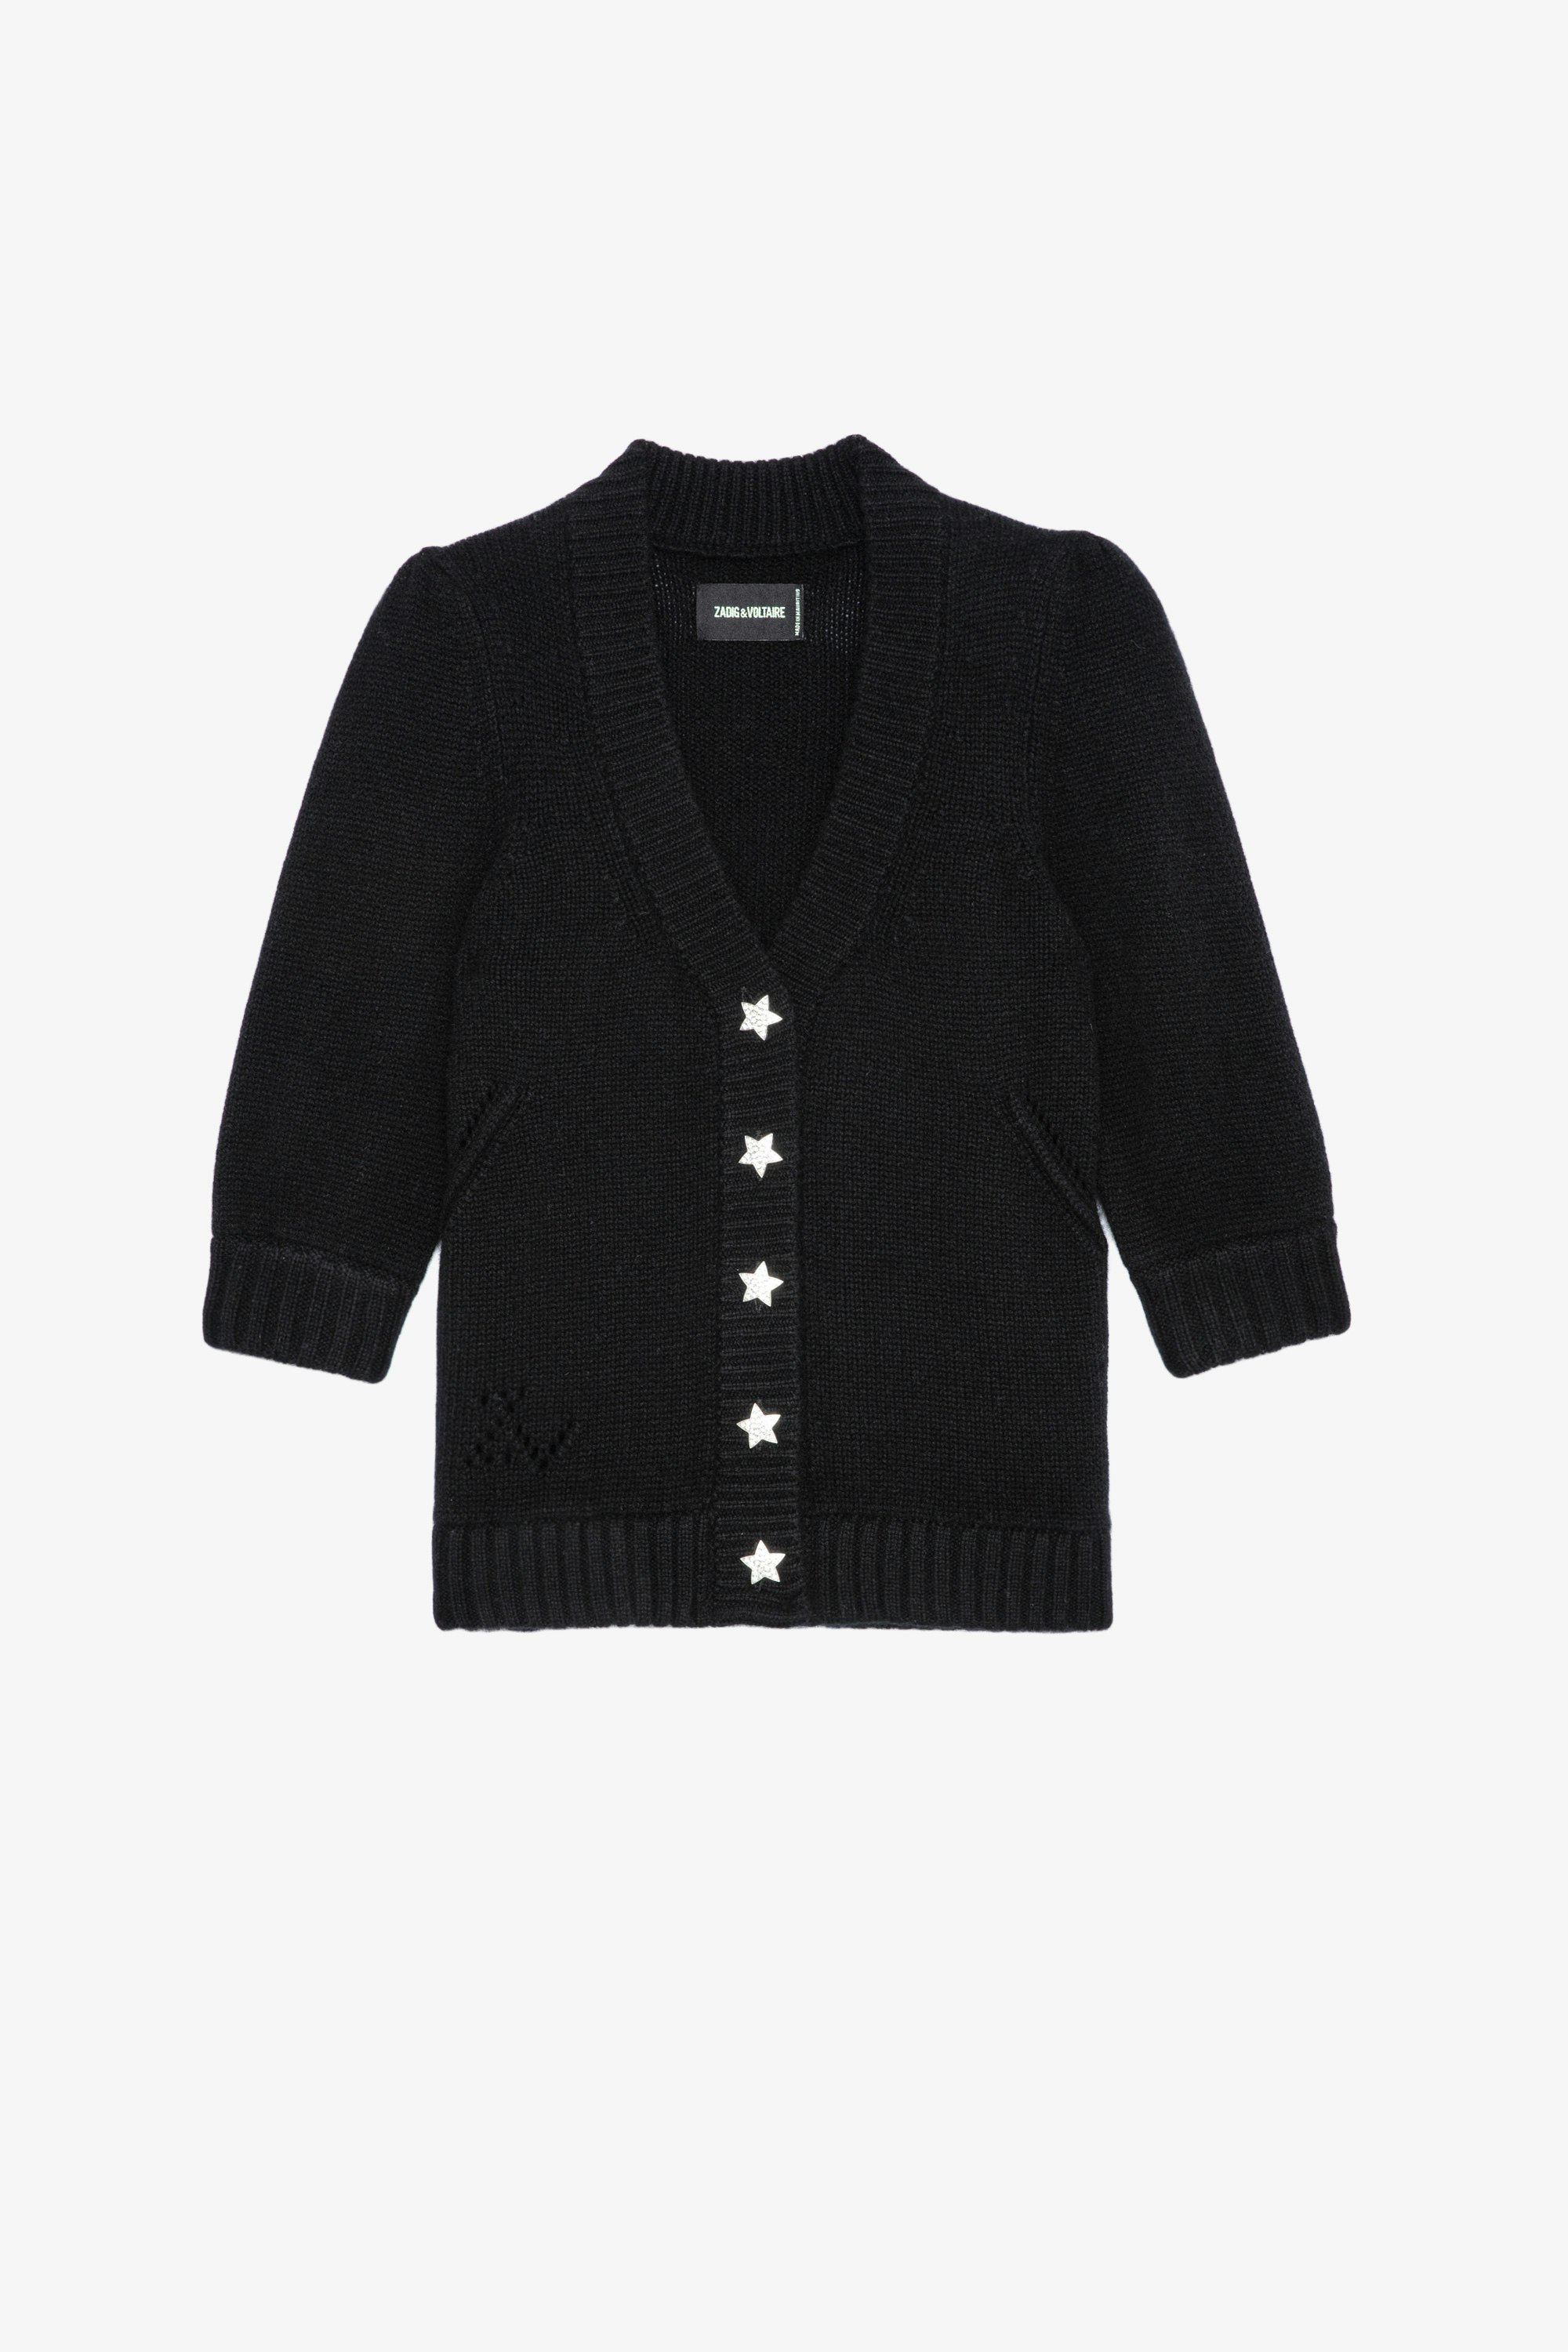 Betsy Cashmere Cardigan - Women’s black cashmere cardigan with full sleeves